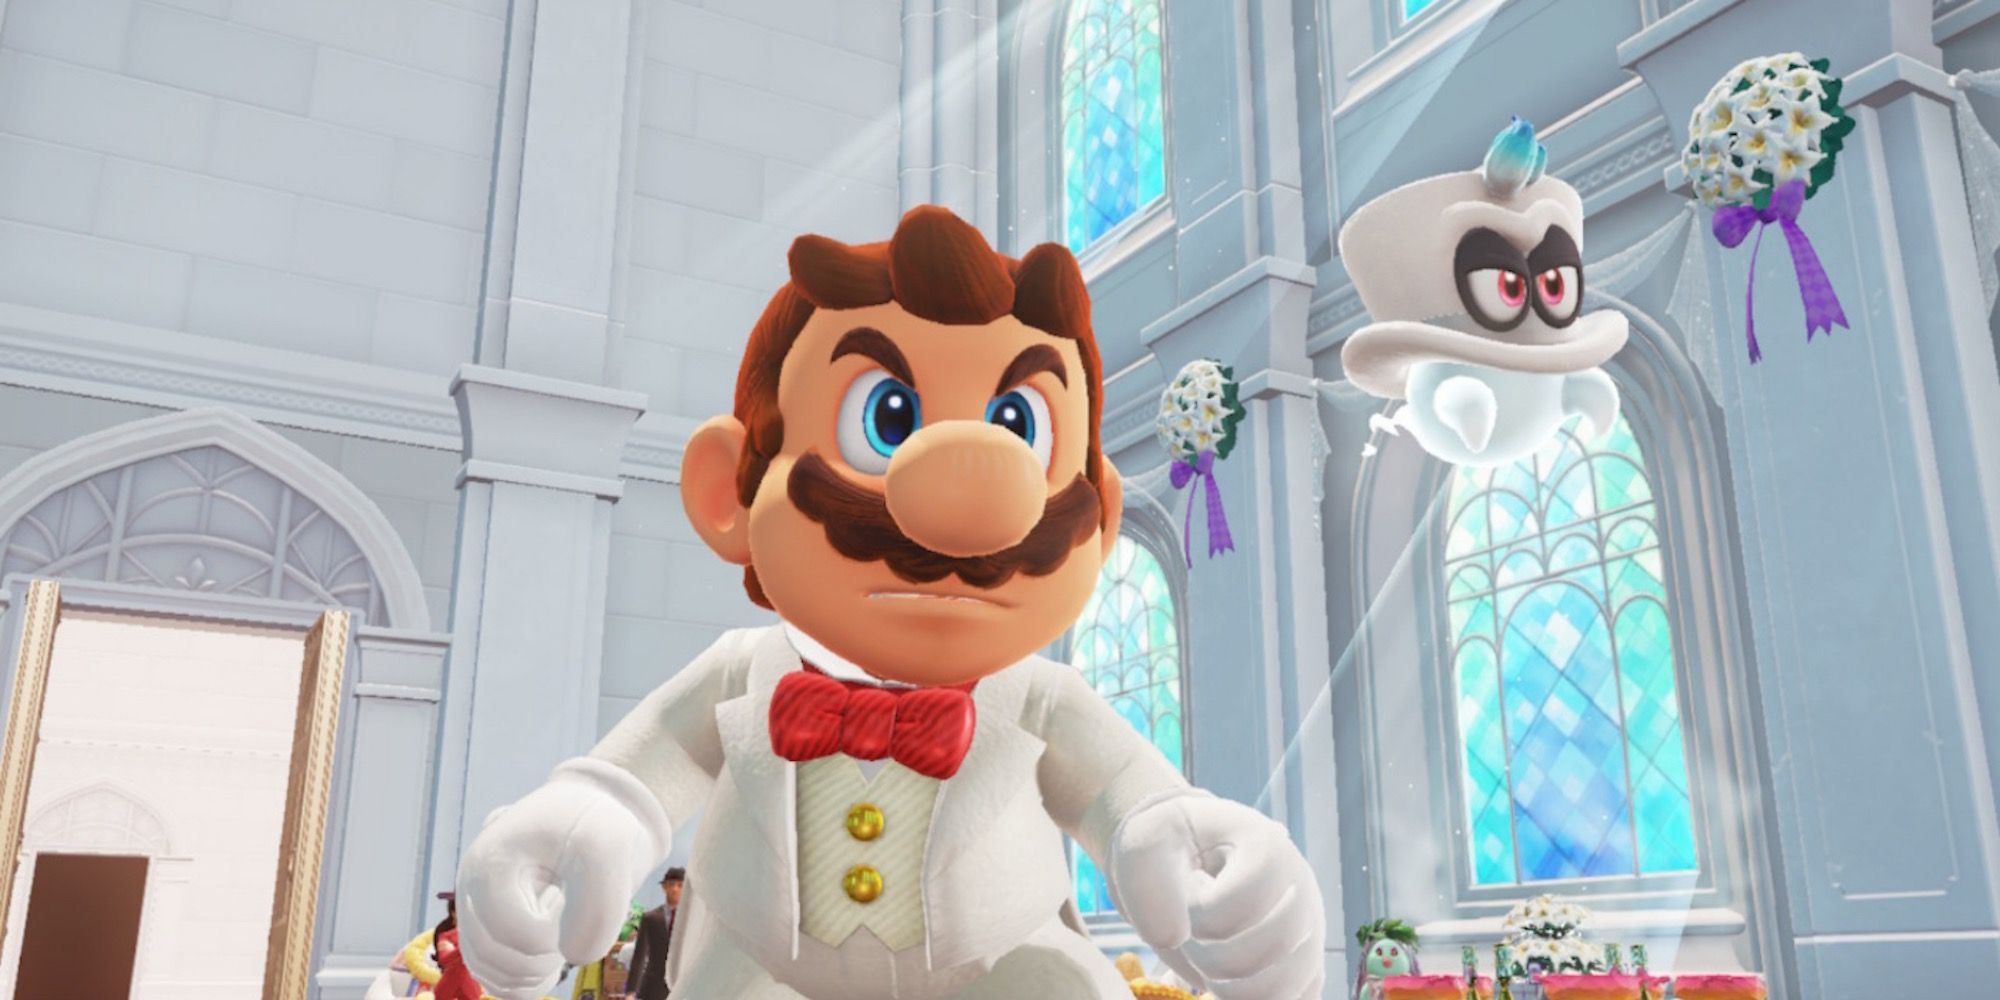 A cutscene featuring characters in Super Mario Odyssey